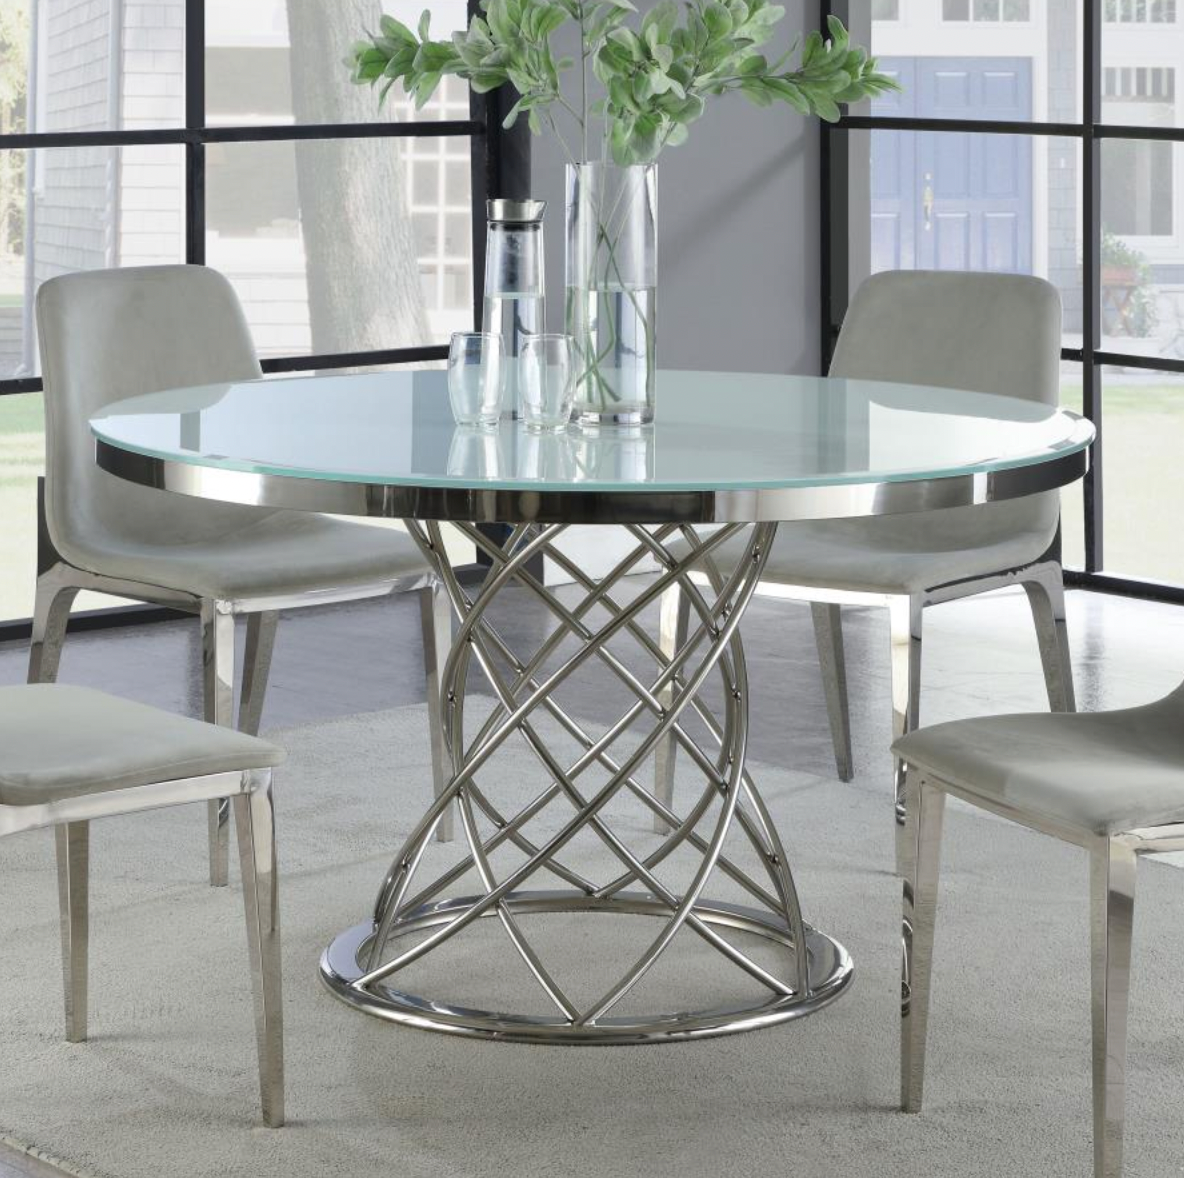 IRENE Round Glass Top Dining Table